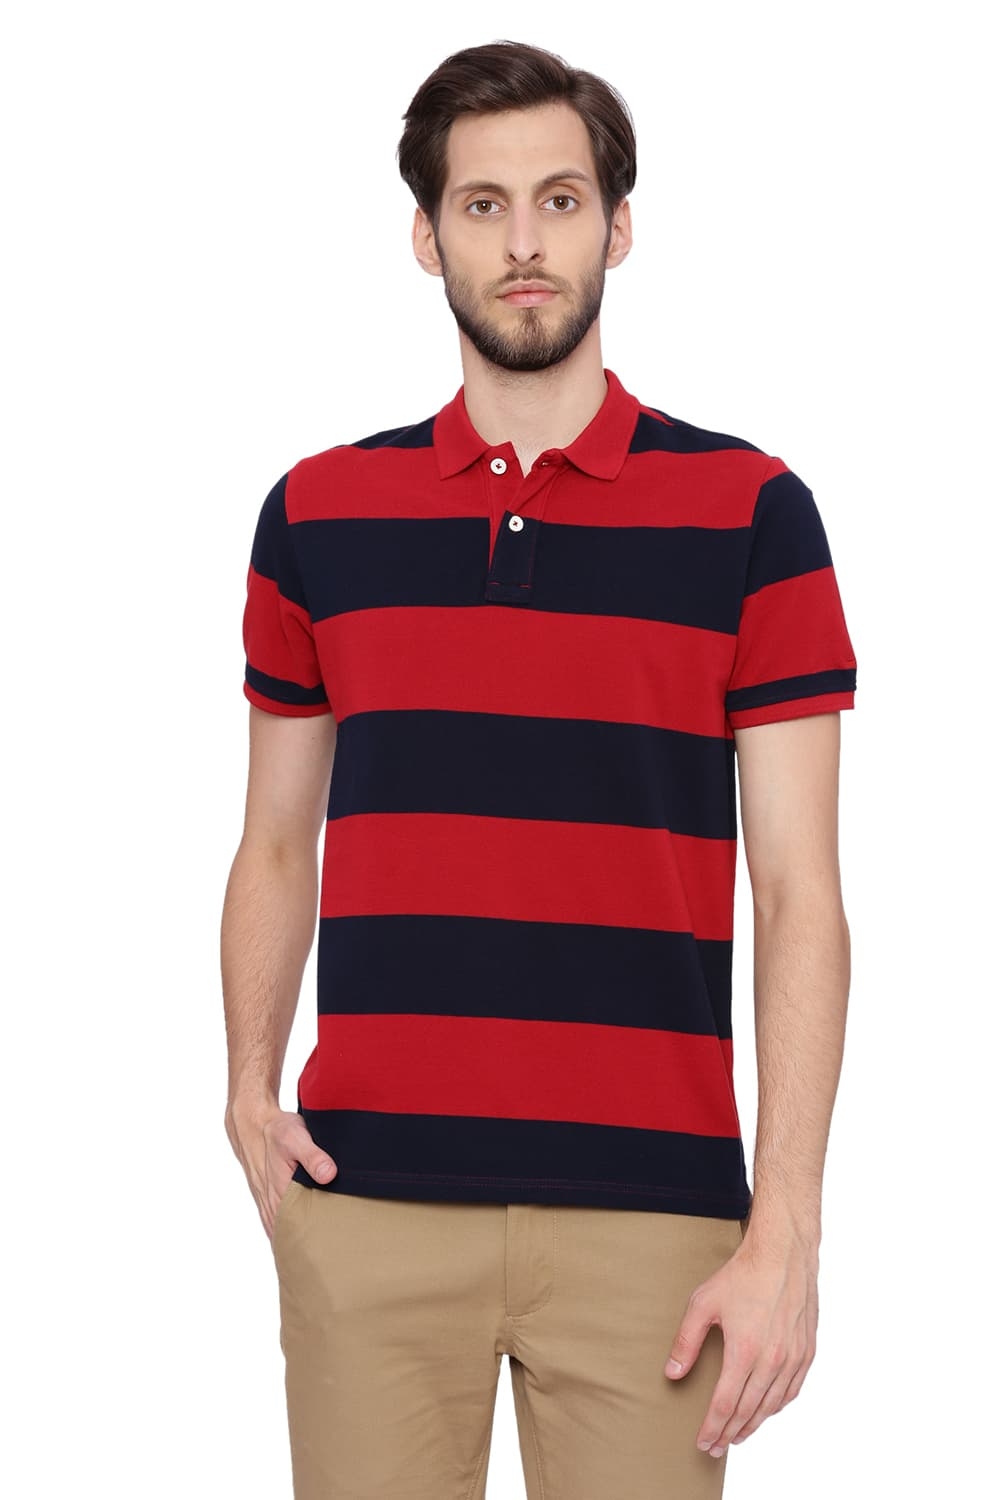 BASICS | Basics Muscle Fit Dark Red Striped Polo T Shirt